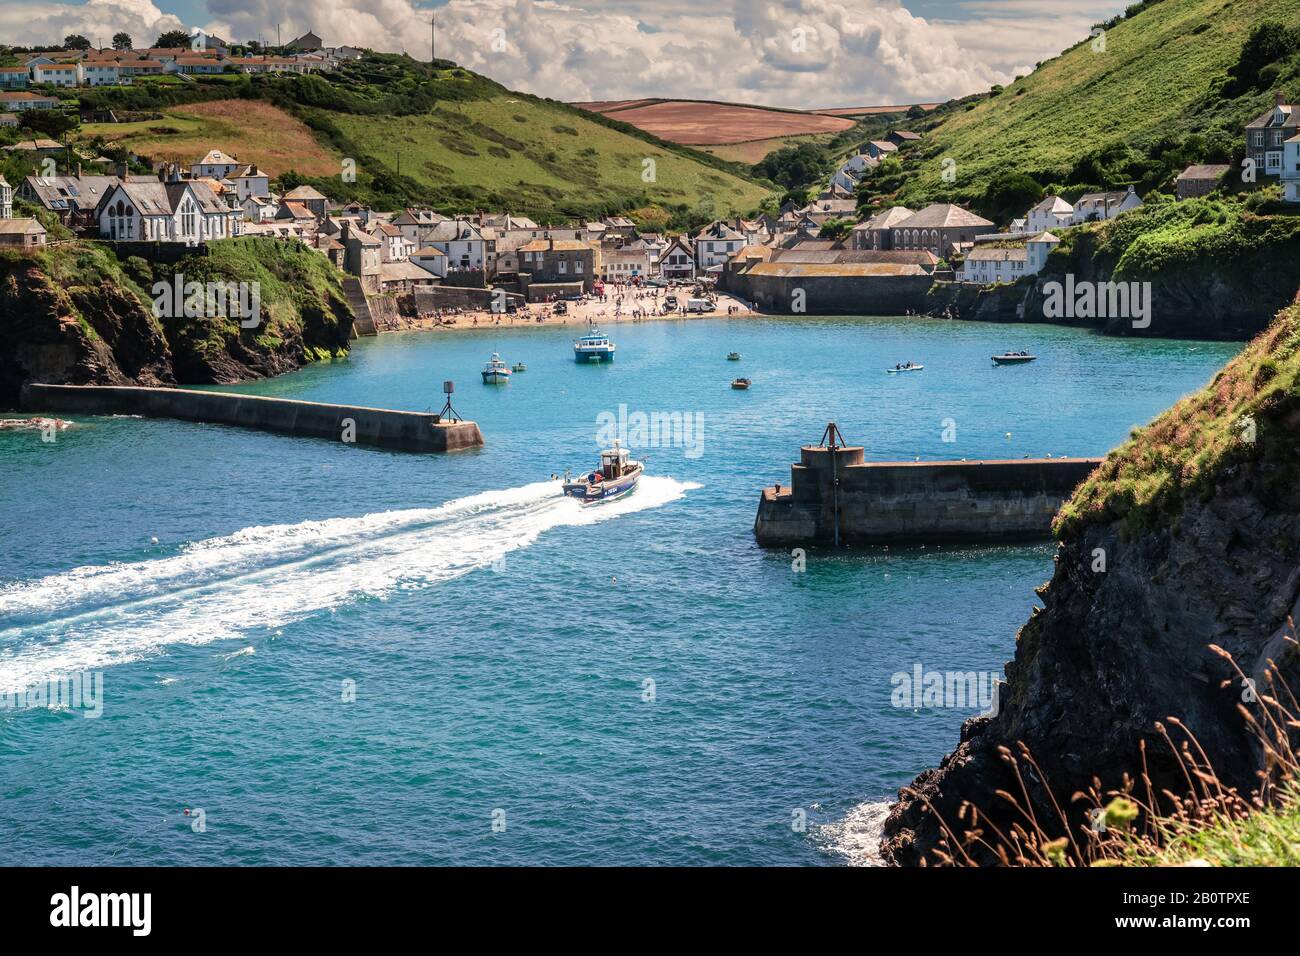 From the famous TV Series Doc Martin. The picturesque village of Port Isaac in Cornwall England. Stock Photo